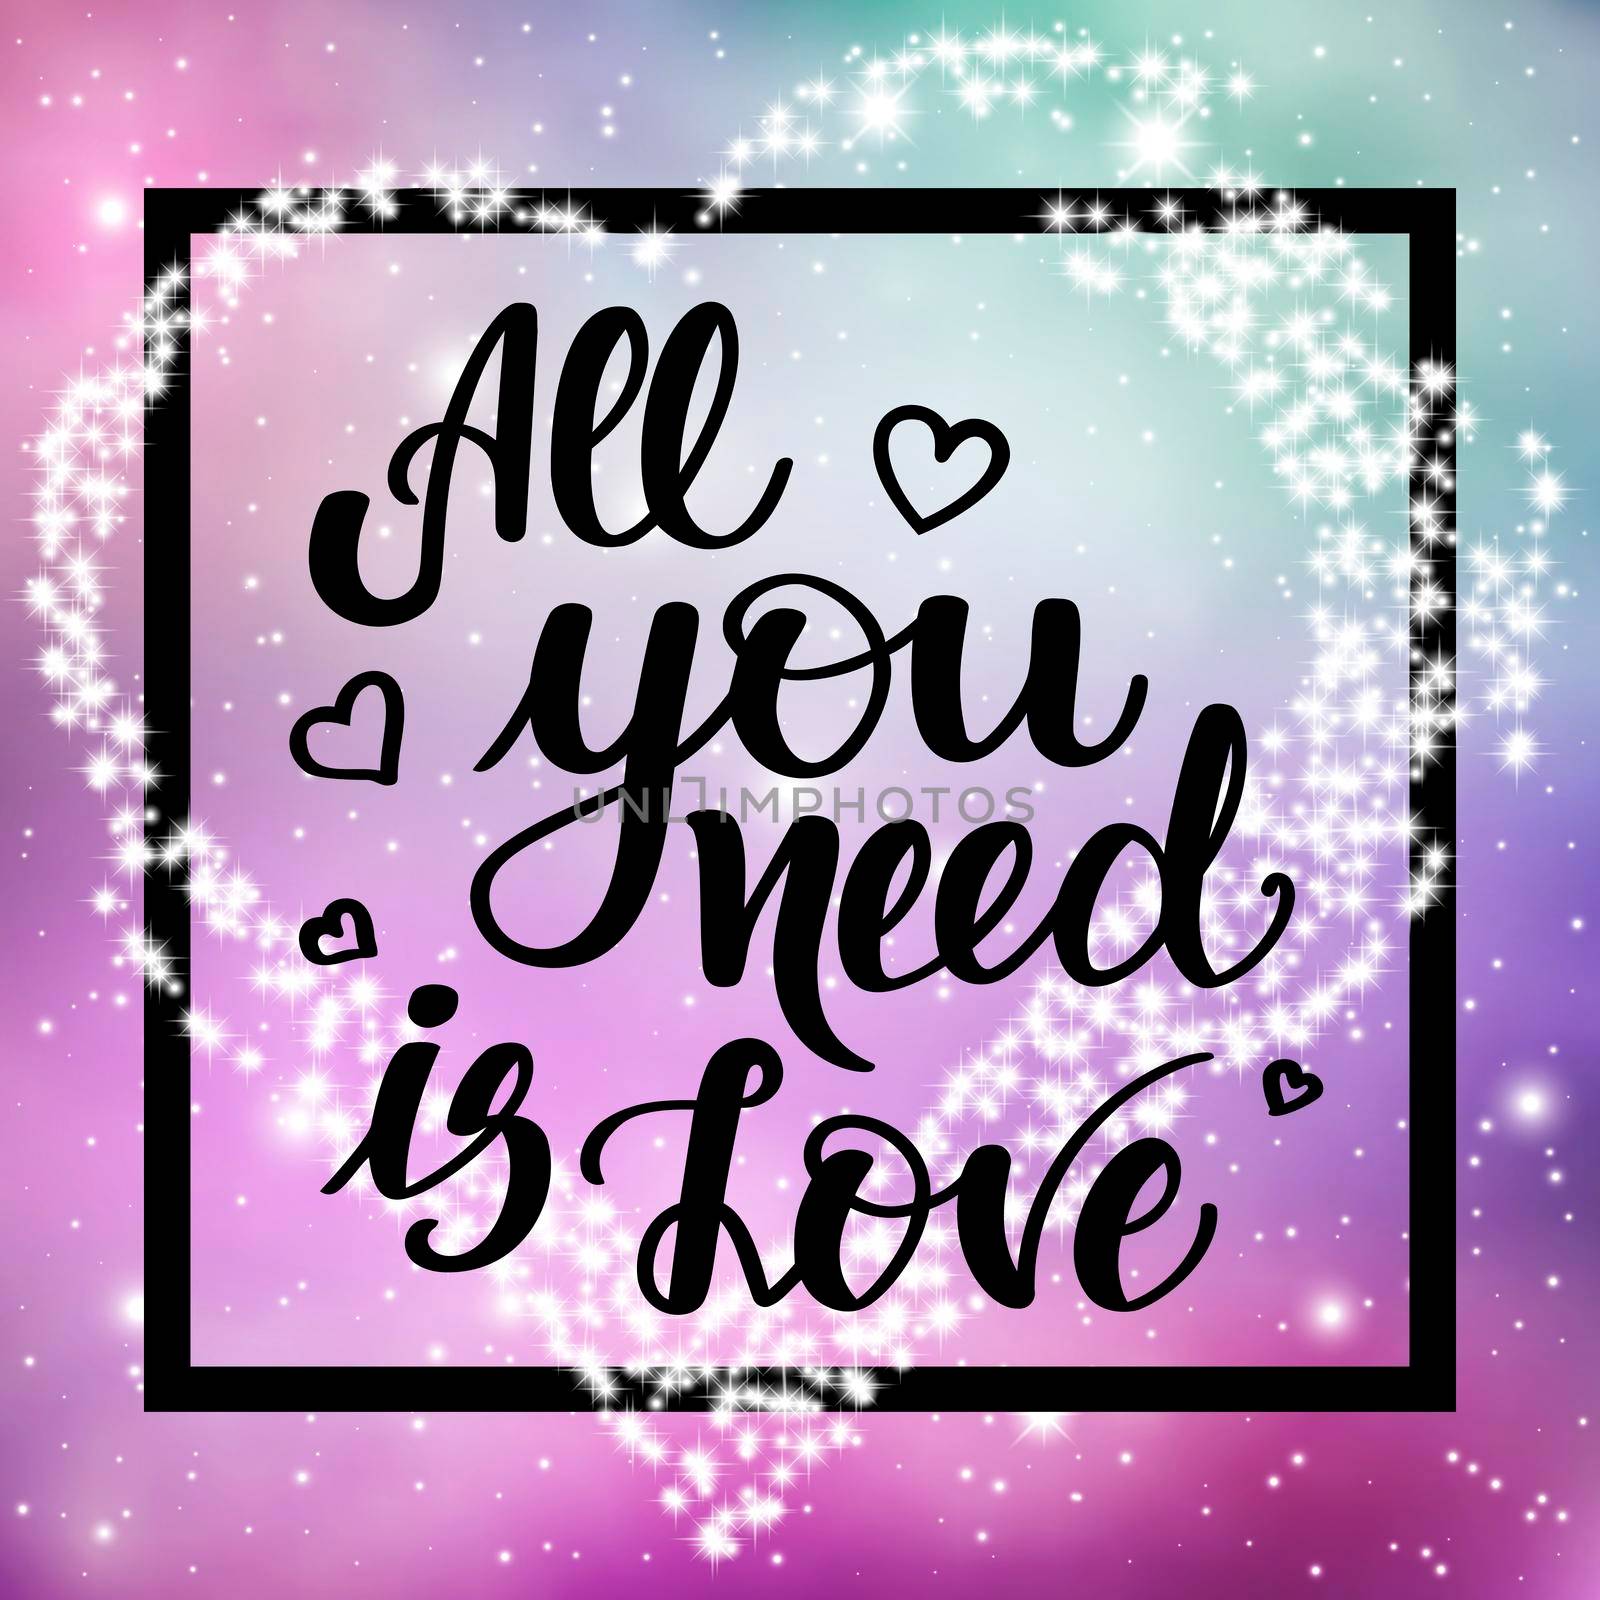 All you need is love. Motivational and inspirational handwritten lettering on space background. illustration for posters, cards and much more.